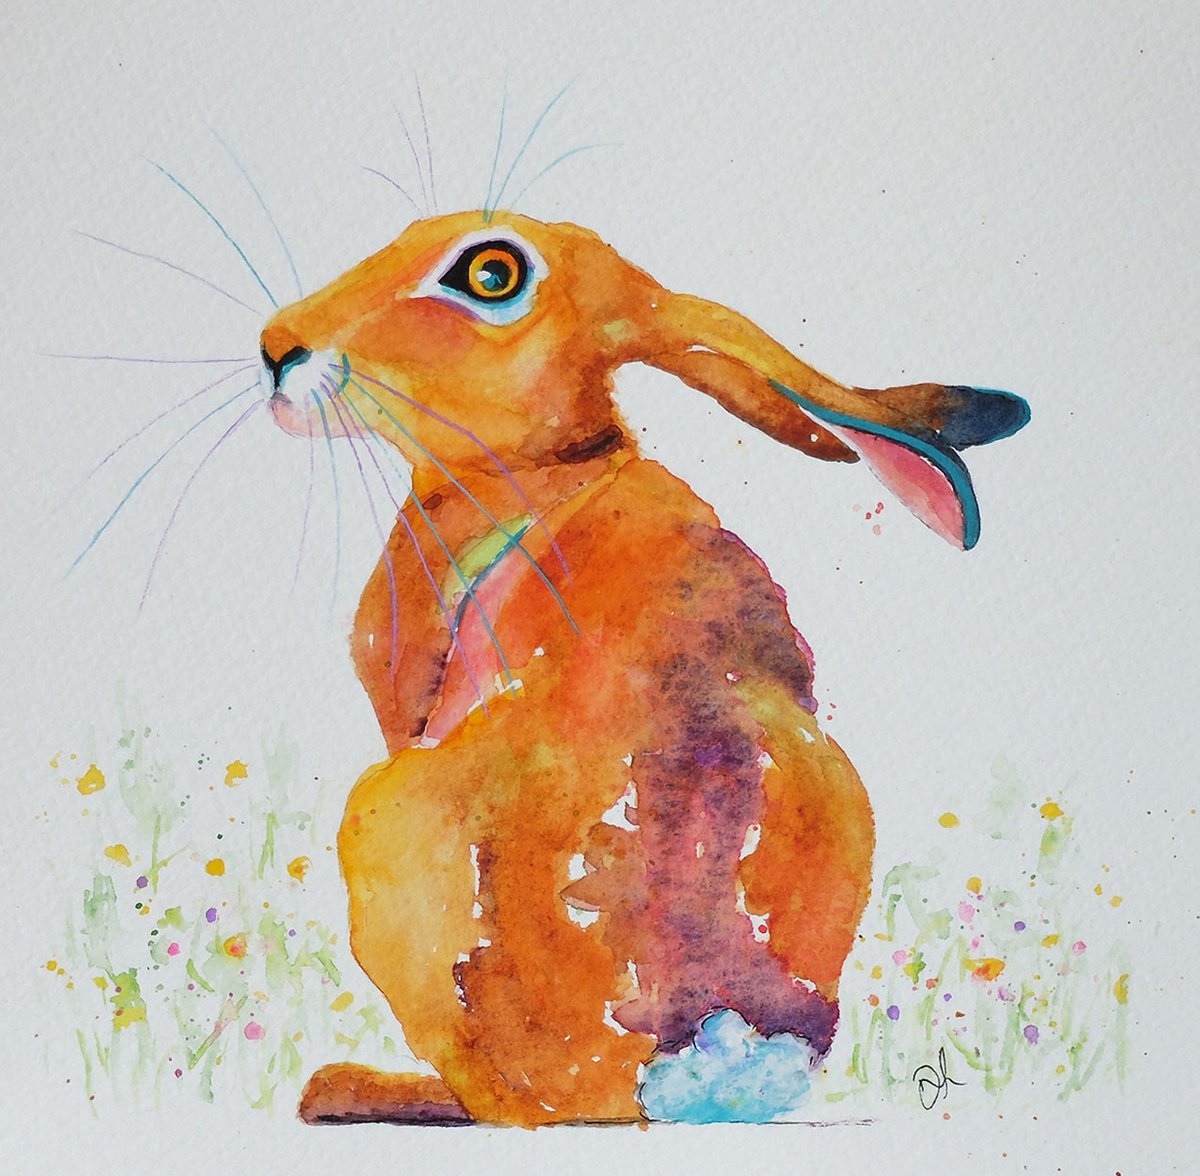 Colourful Hare In Watercolour by Denise Laurent